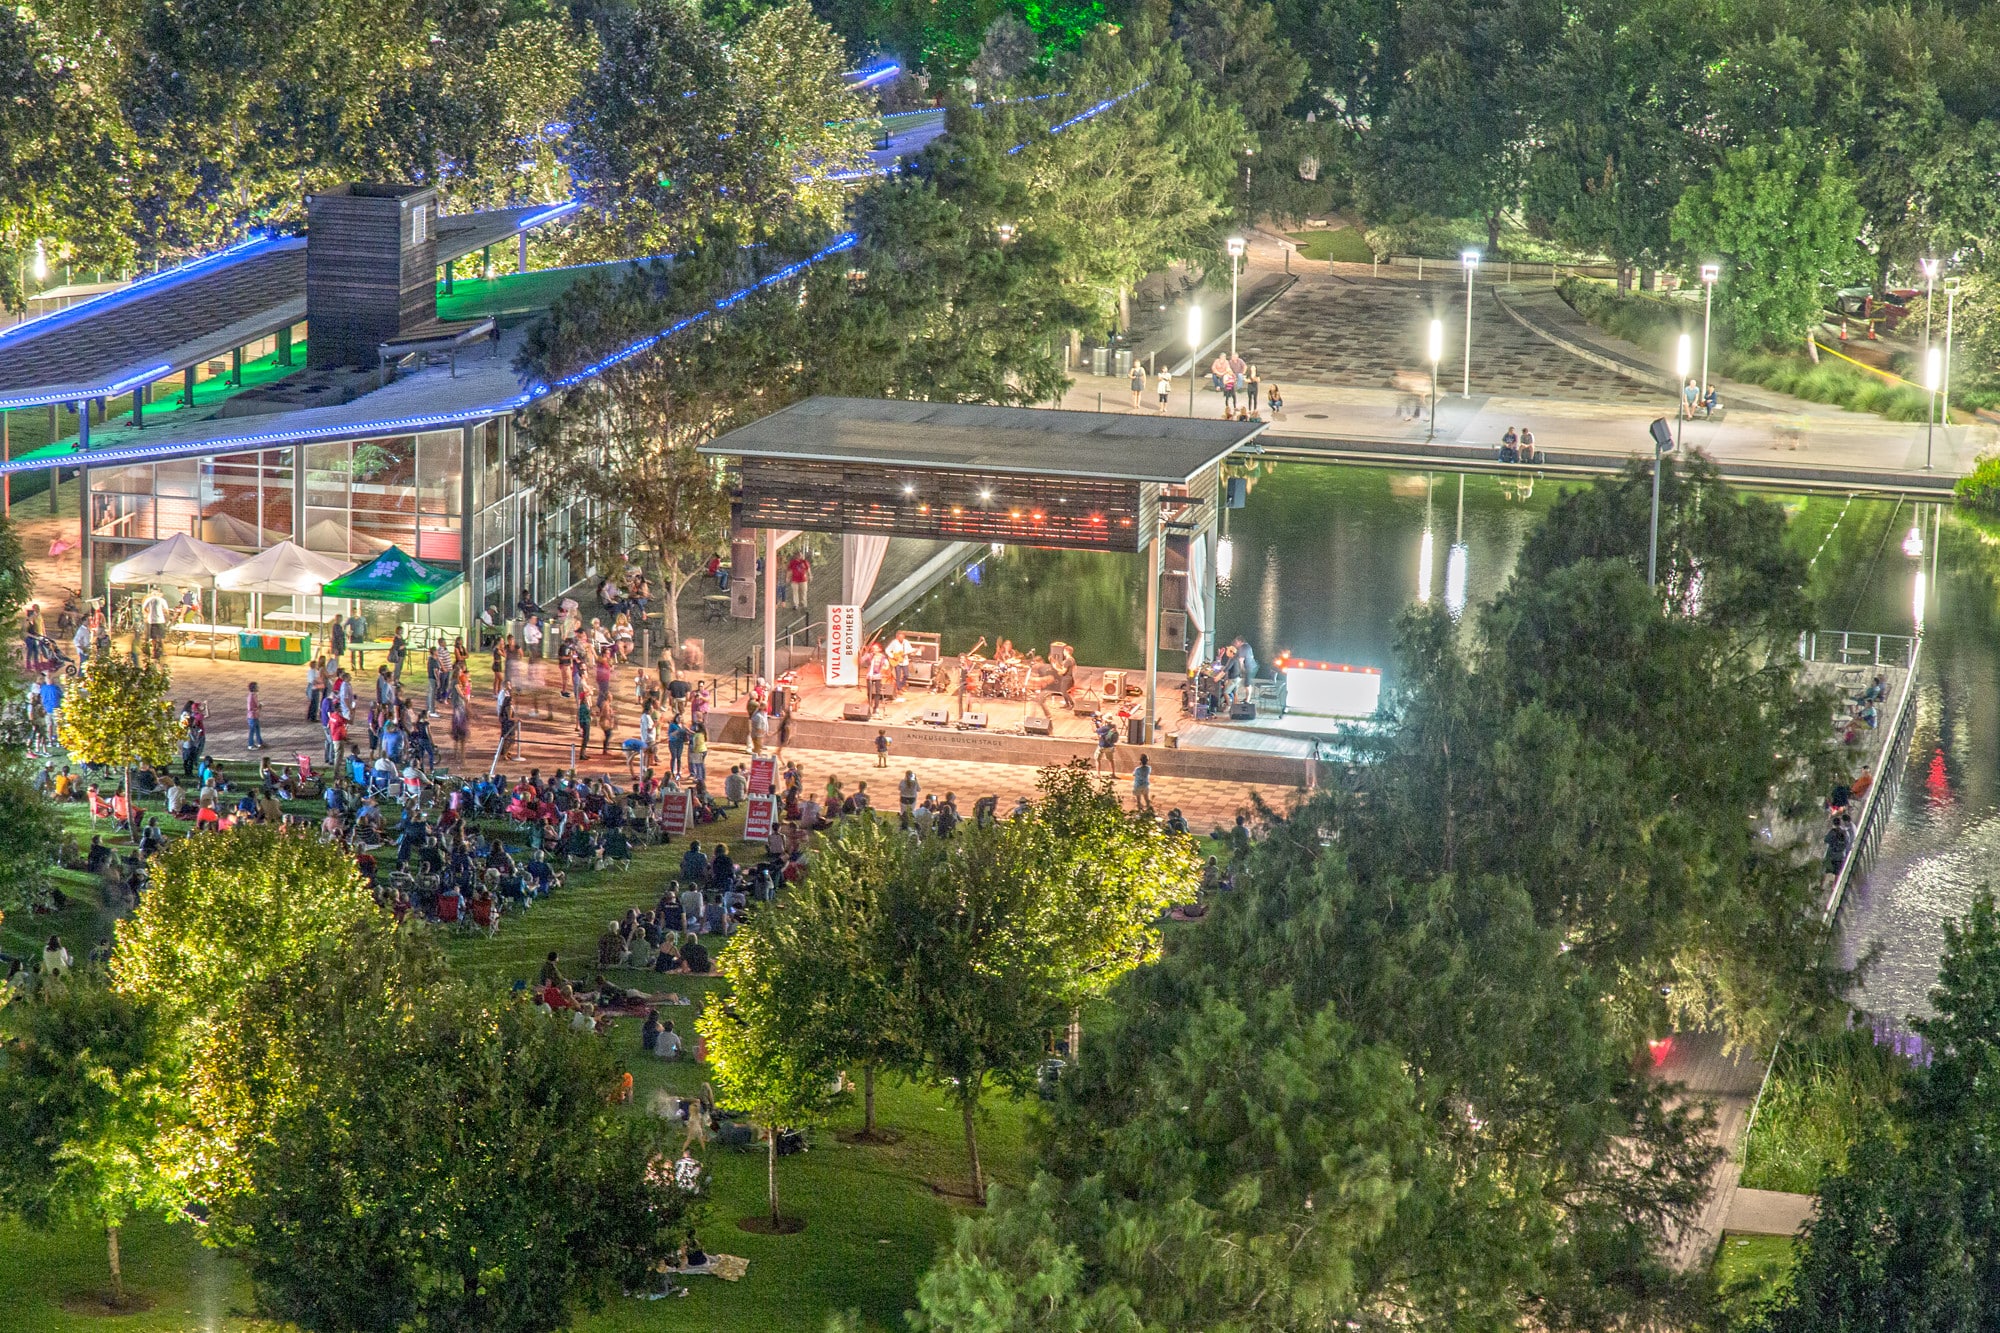 Anheuser-Busch stage at Discovery Green is Houston's best live venue according to the Houston Press